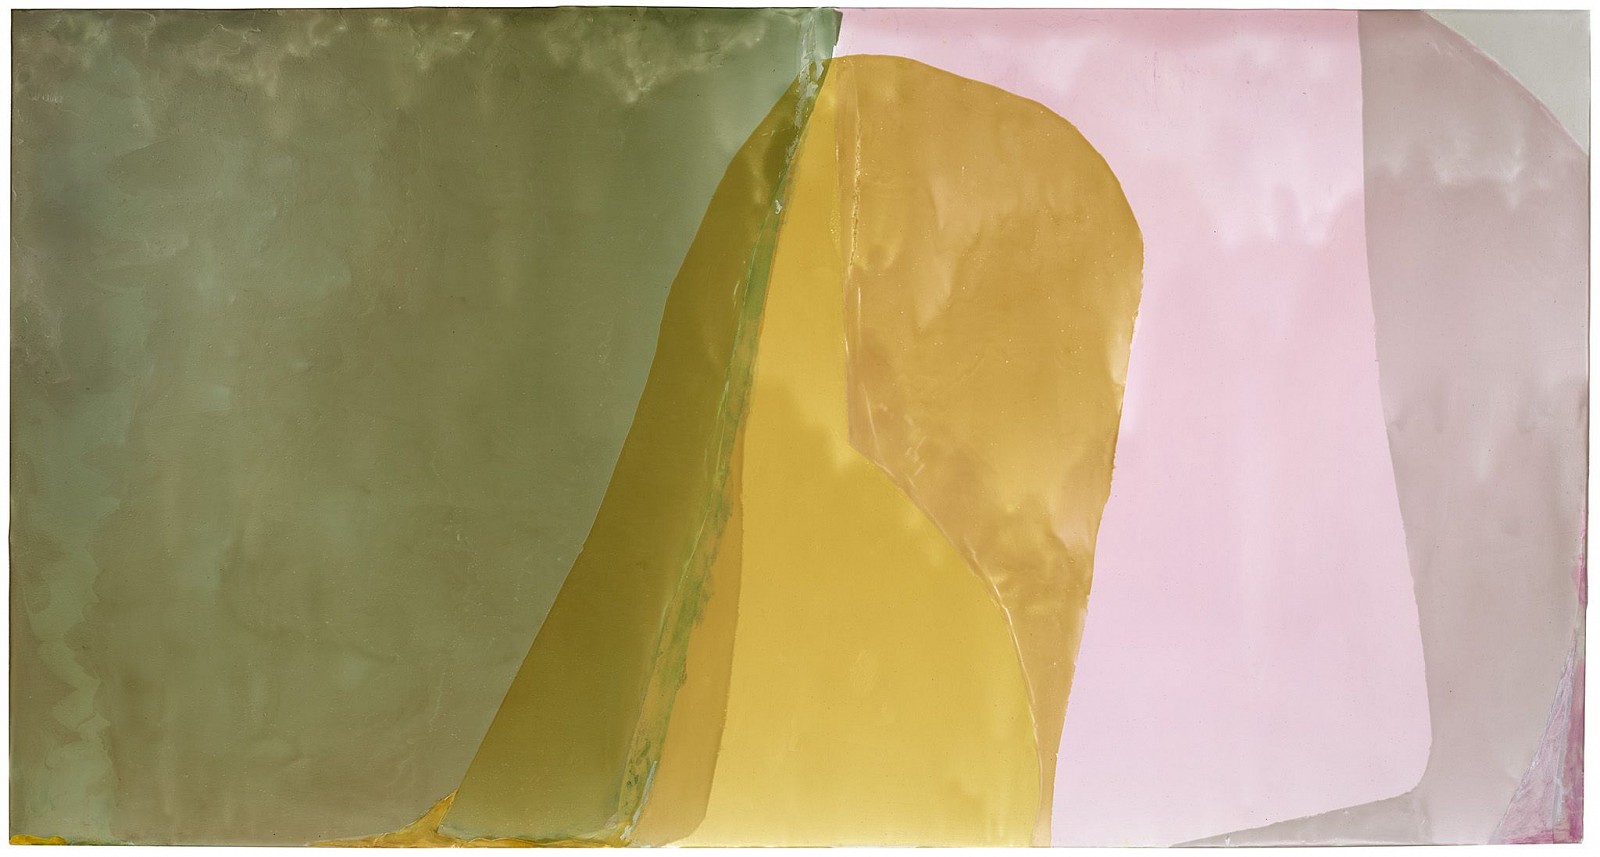 Jill Nathanson, Avow, 2022
Acrylic and polymers with oil on panel, 43 x 81 in. (109.2 x 205.7 cm)
NAT-00152